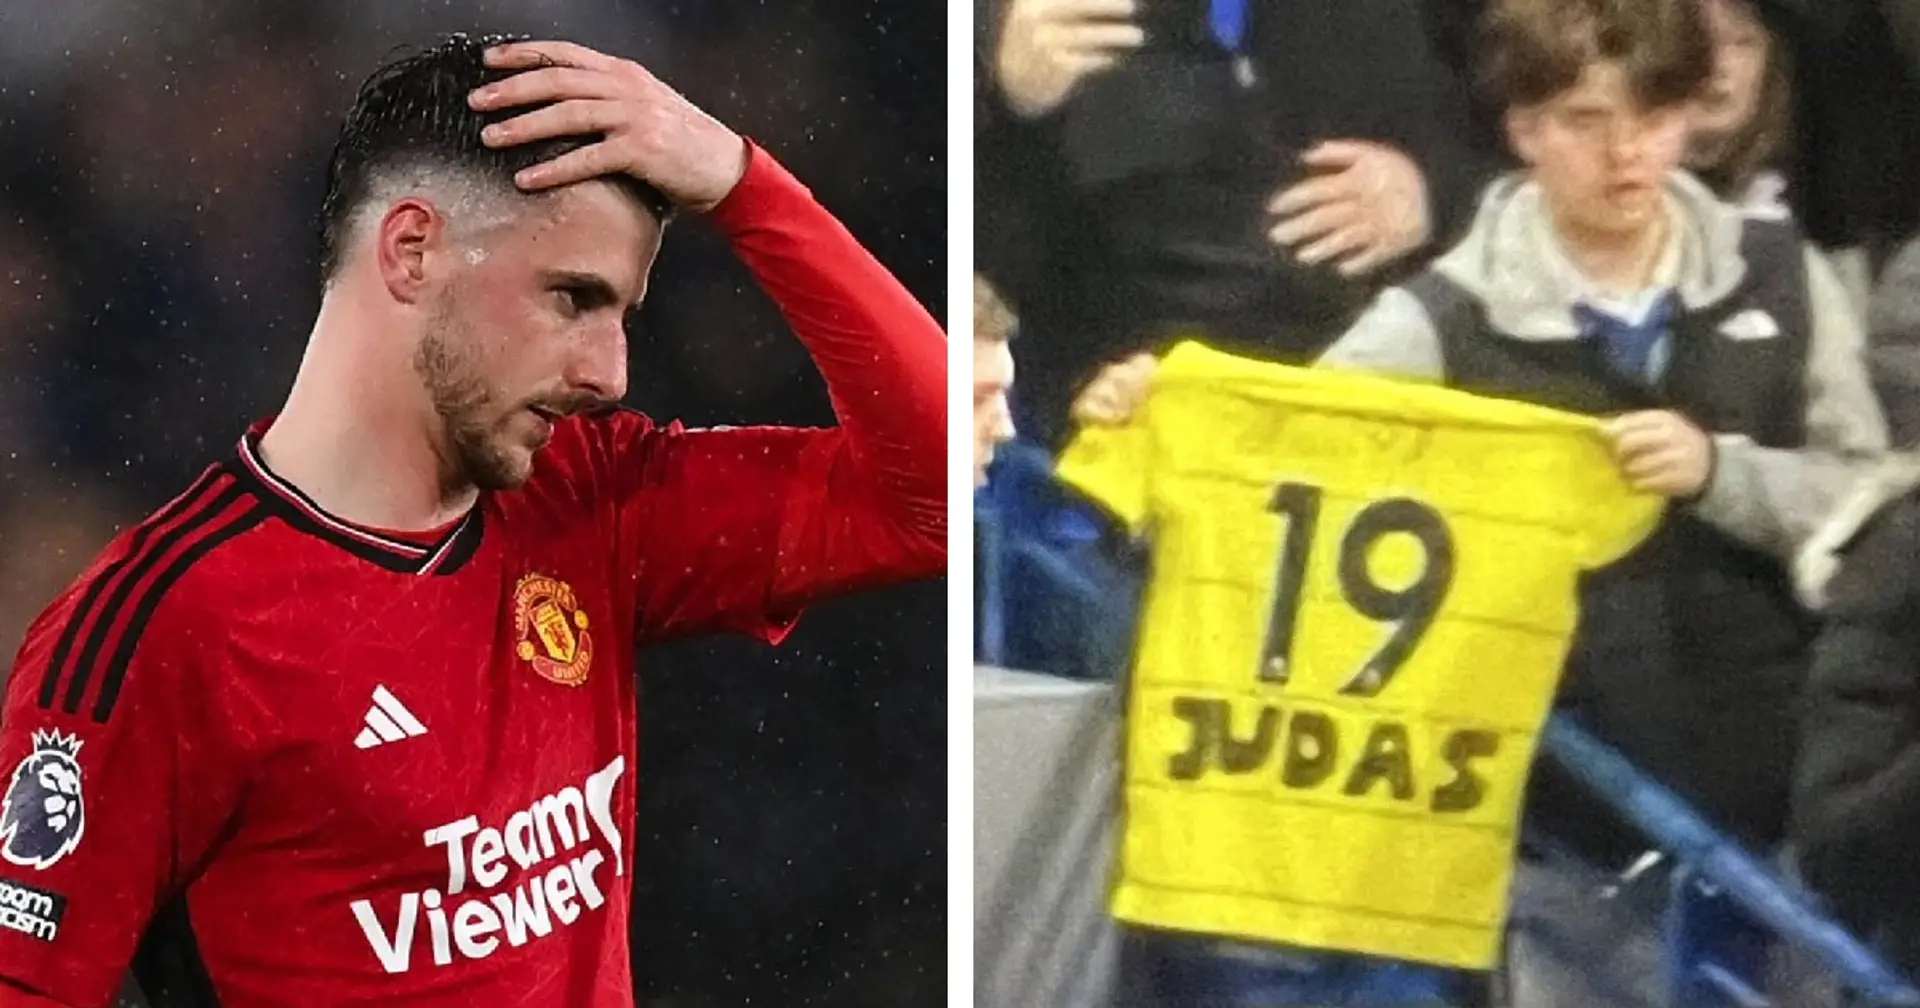 Spotted: Fan holds up Mount Chelsea shirt with 'Judas' written on it